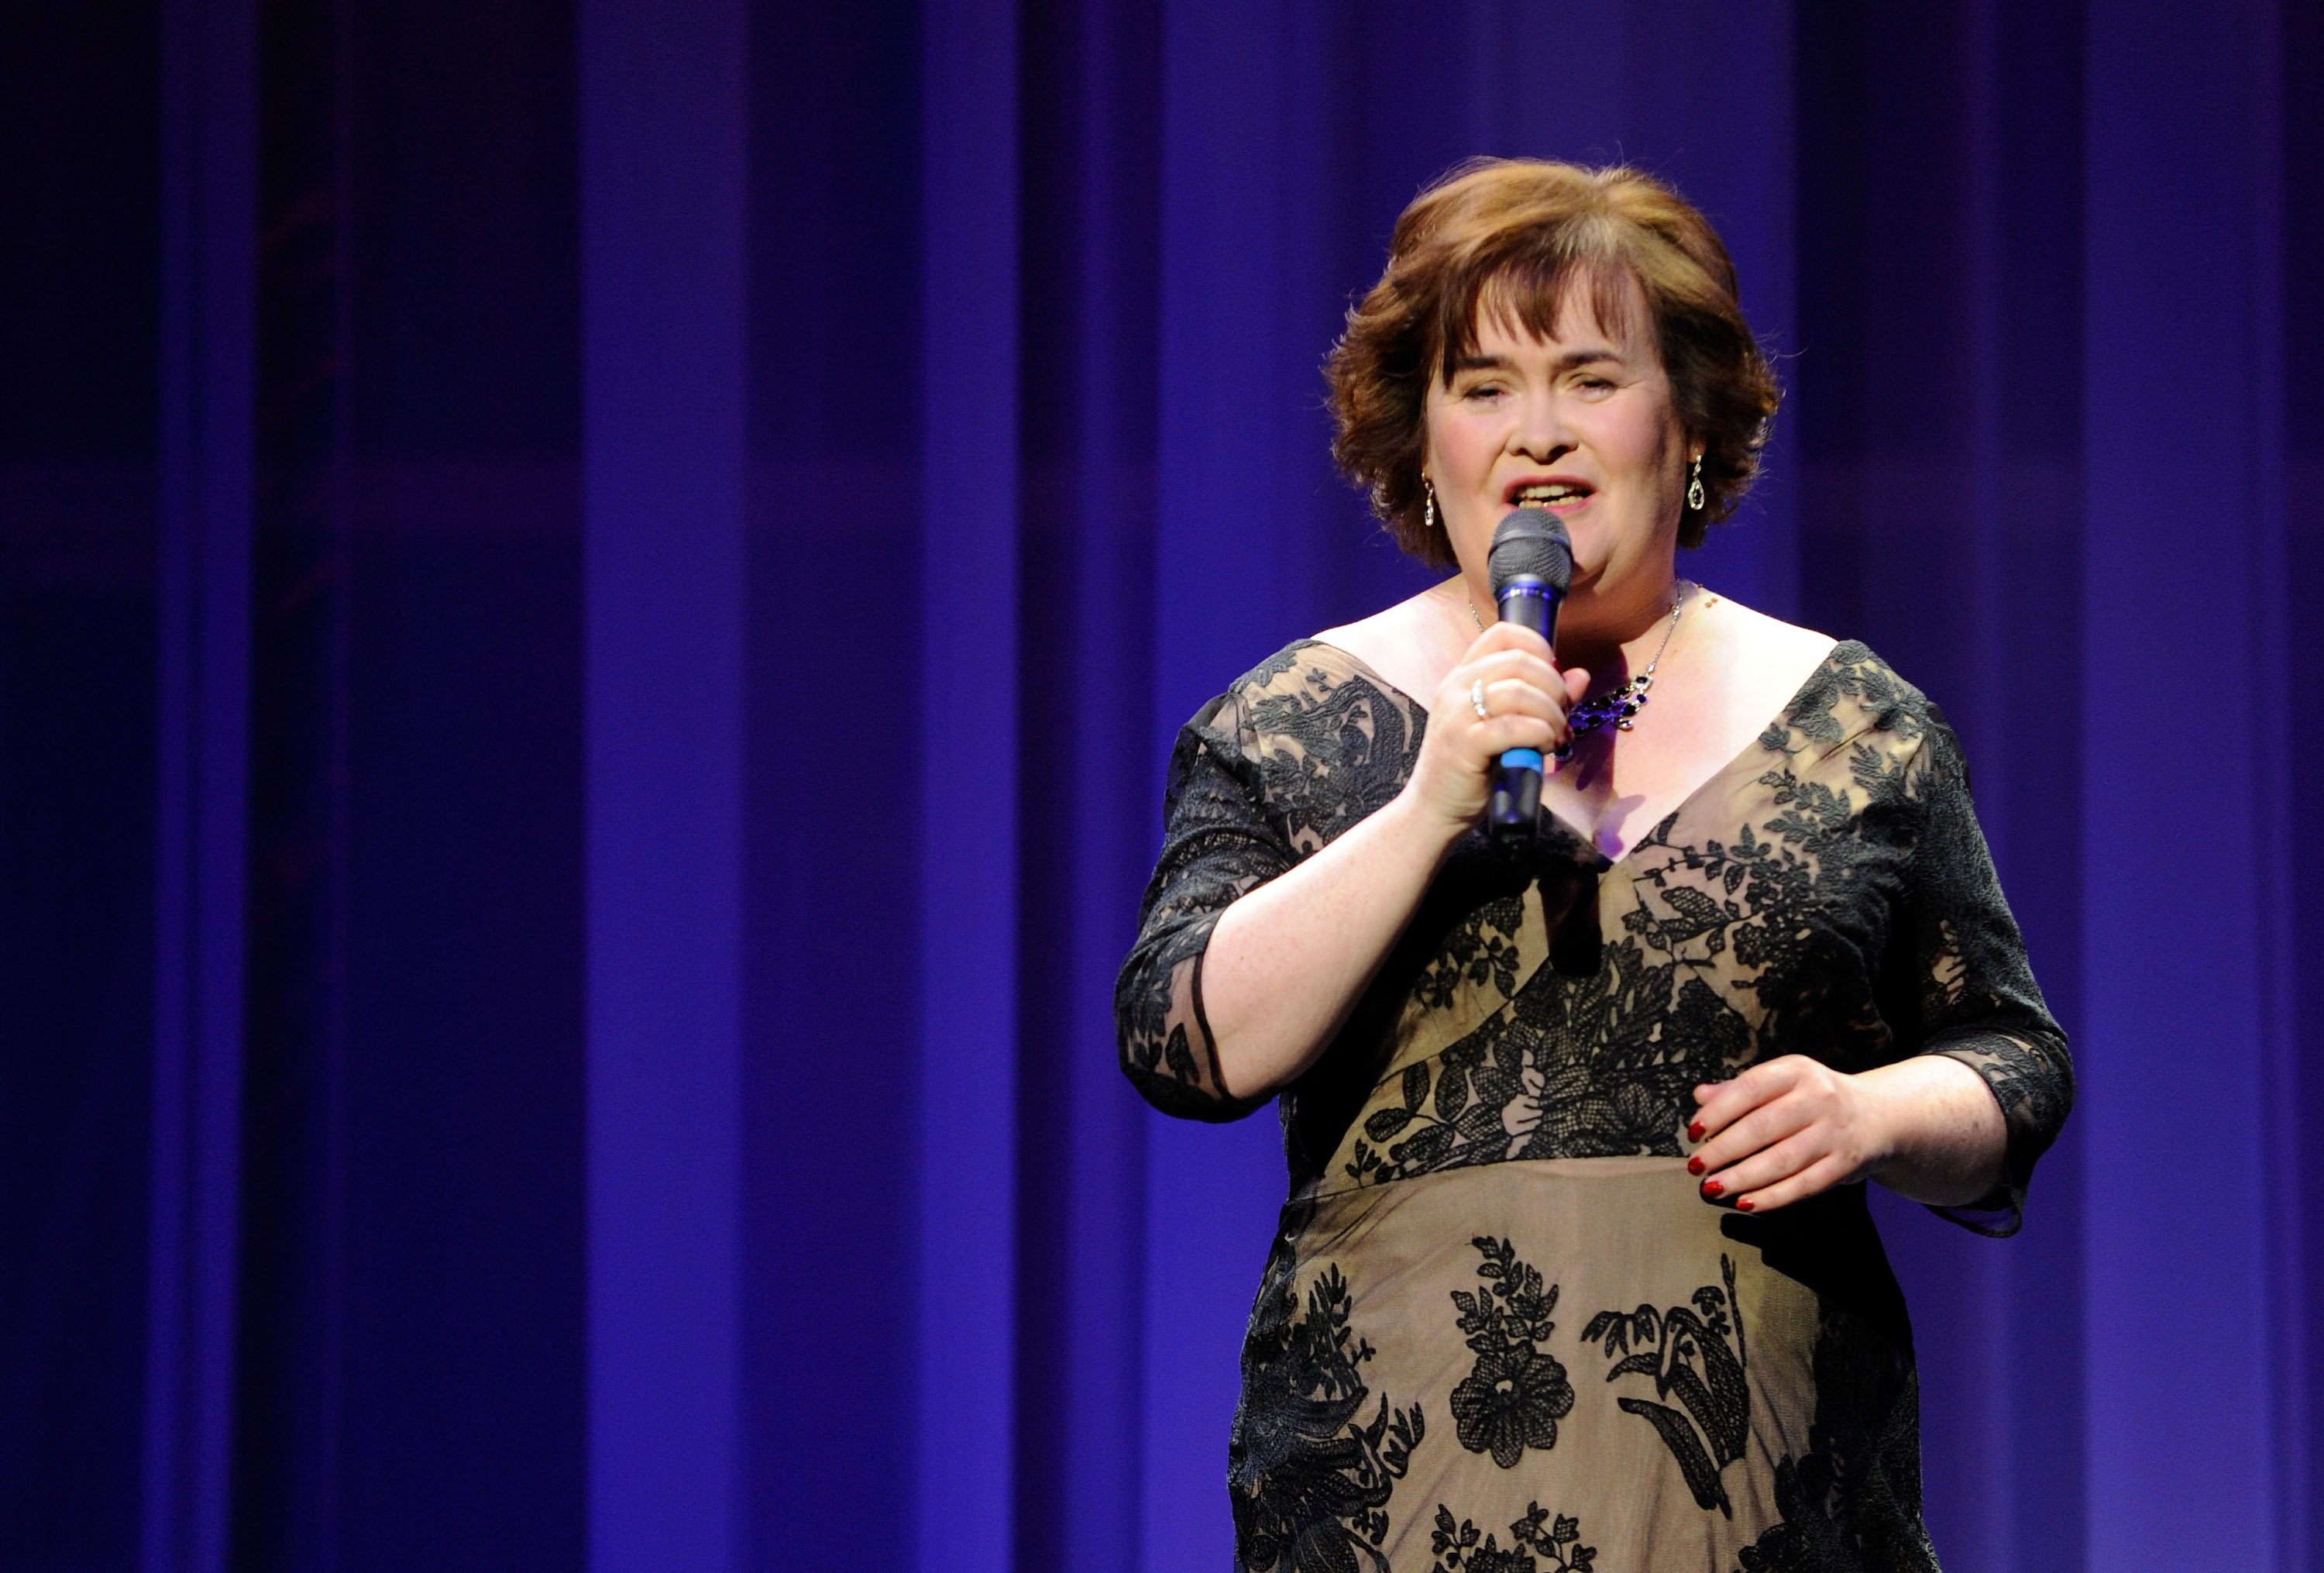  Susan Boyle performs during the Donny & Marie variety show at the Flamingo Las Vegas October 17, 2012. | Photo: GettyImages